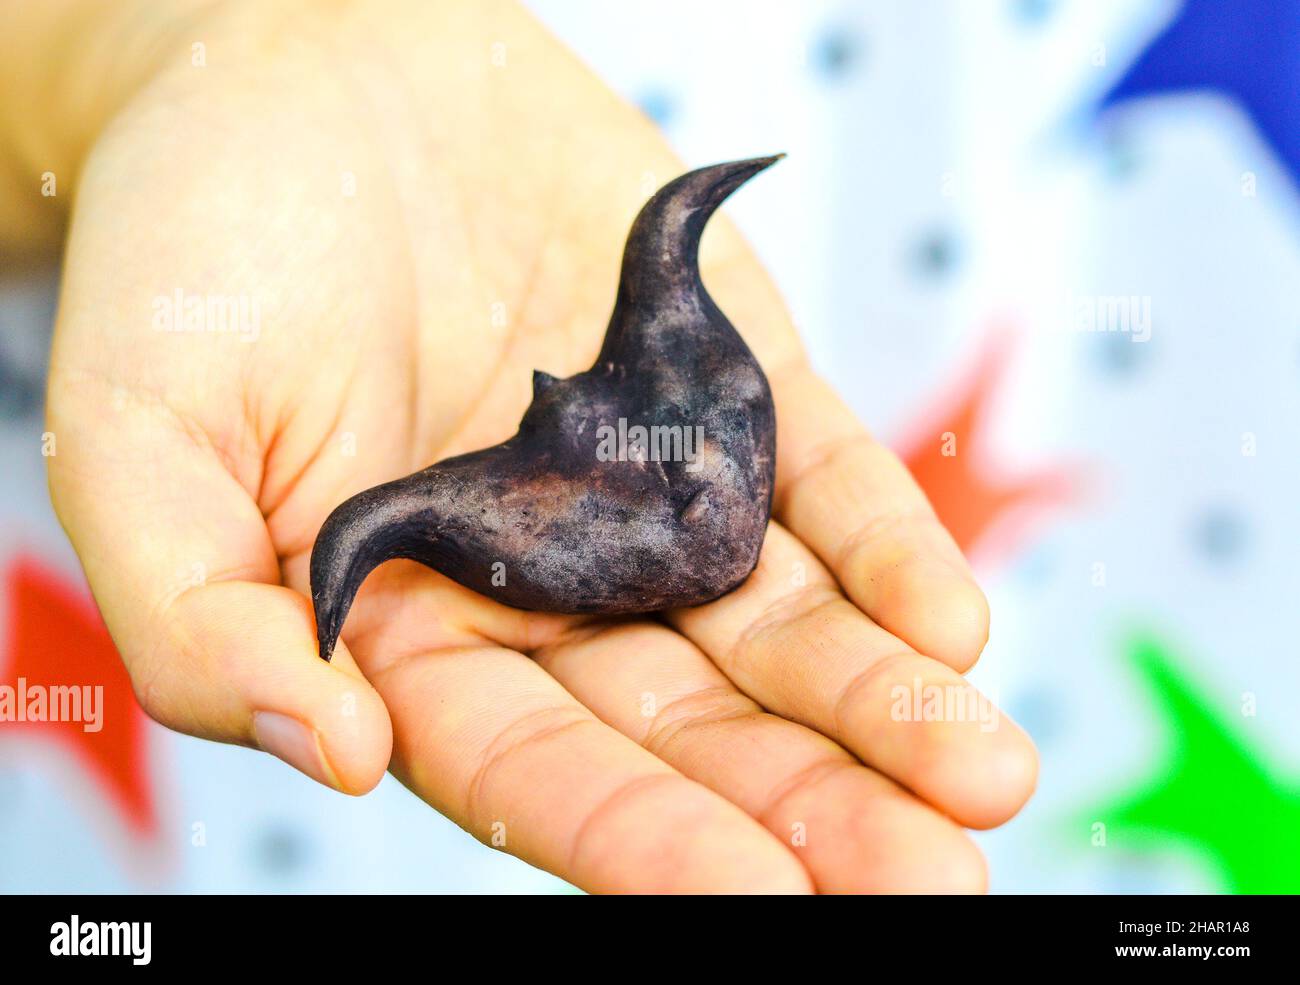 A single Chinese Ling Jiao (water caltrop) placed on a hand. Stock Photo